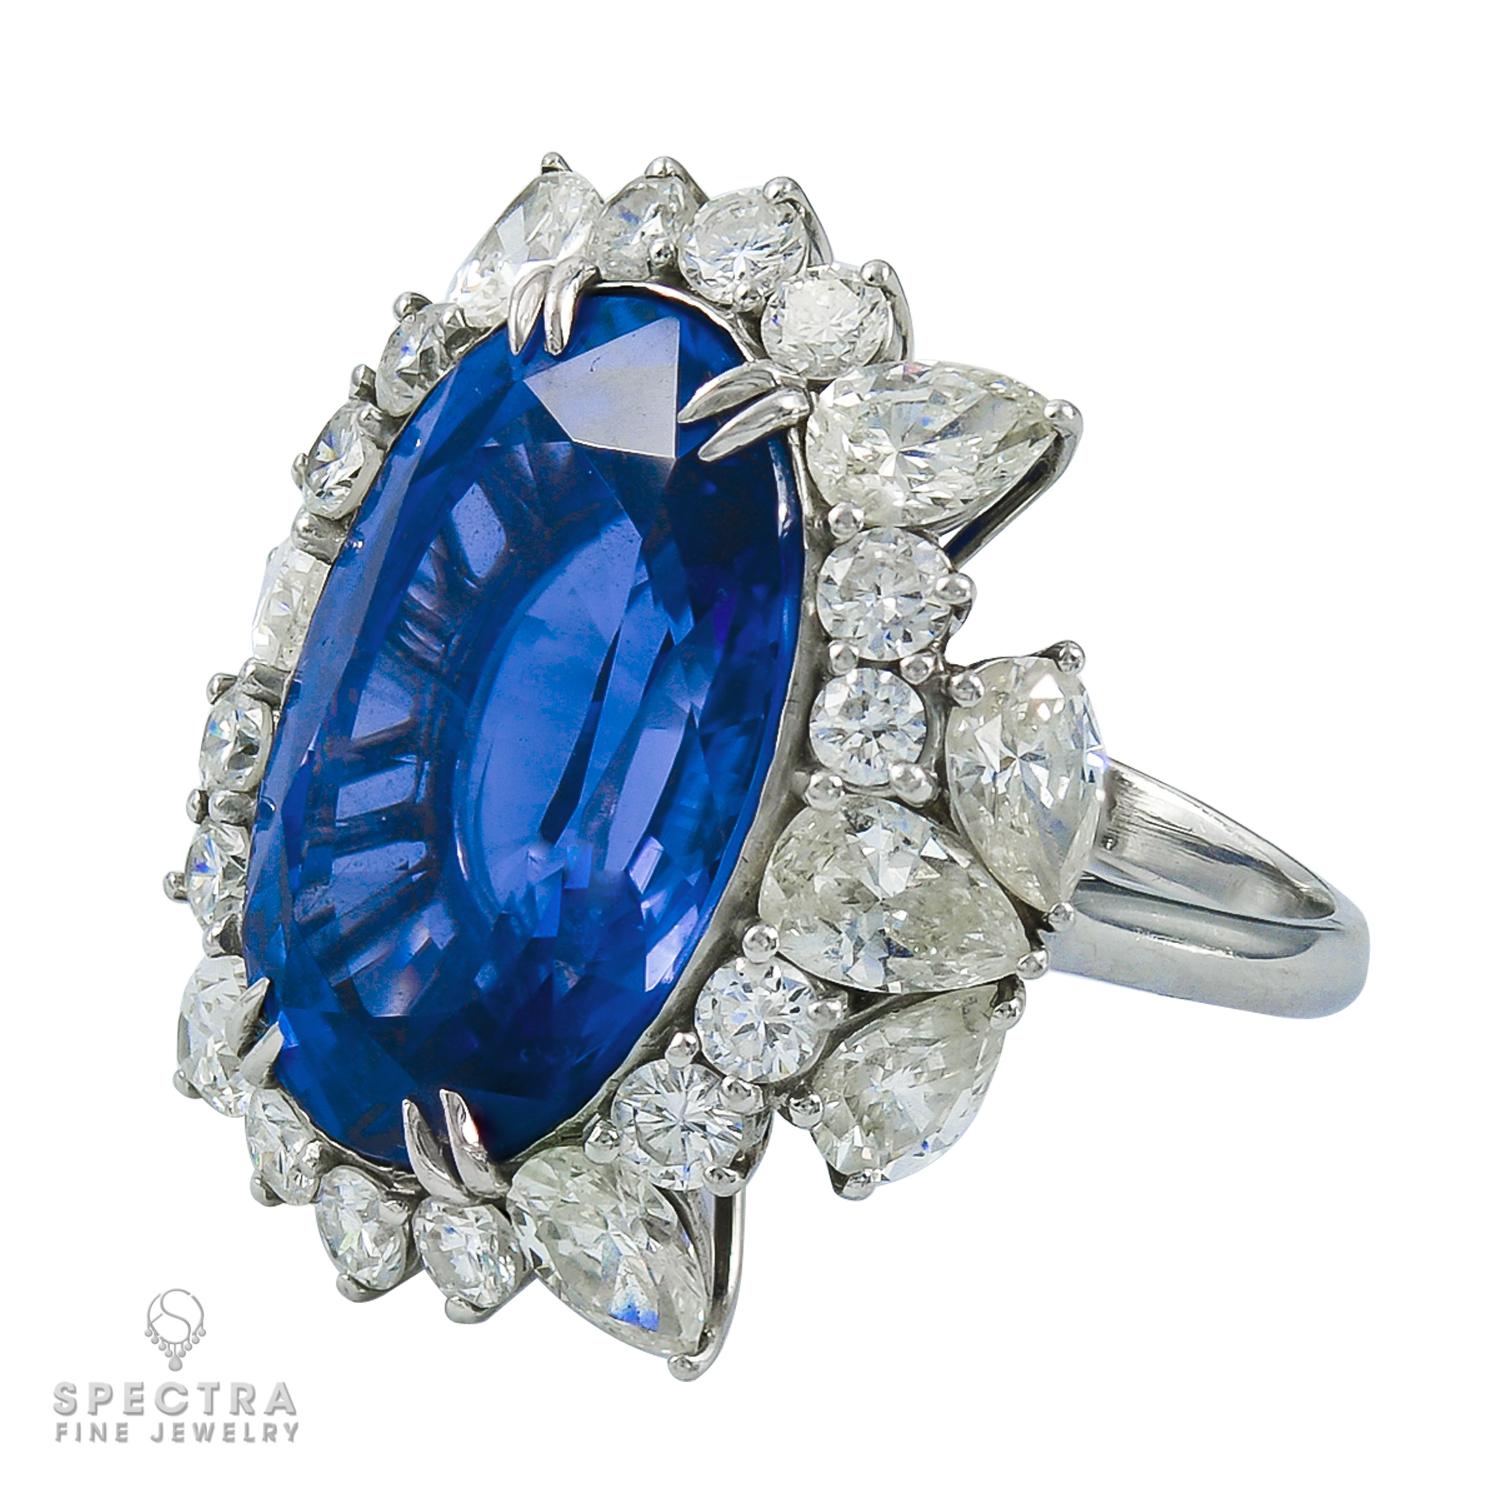 A stunning cocktail ring featuring a 26.19 carat oval blue sapphire and white diamonds.
The sapphire is certified by AGL (American Gemological Laboratories) stating that the stone is of Ceylon origin with no indication of heating or clarity